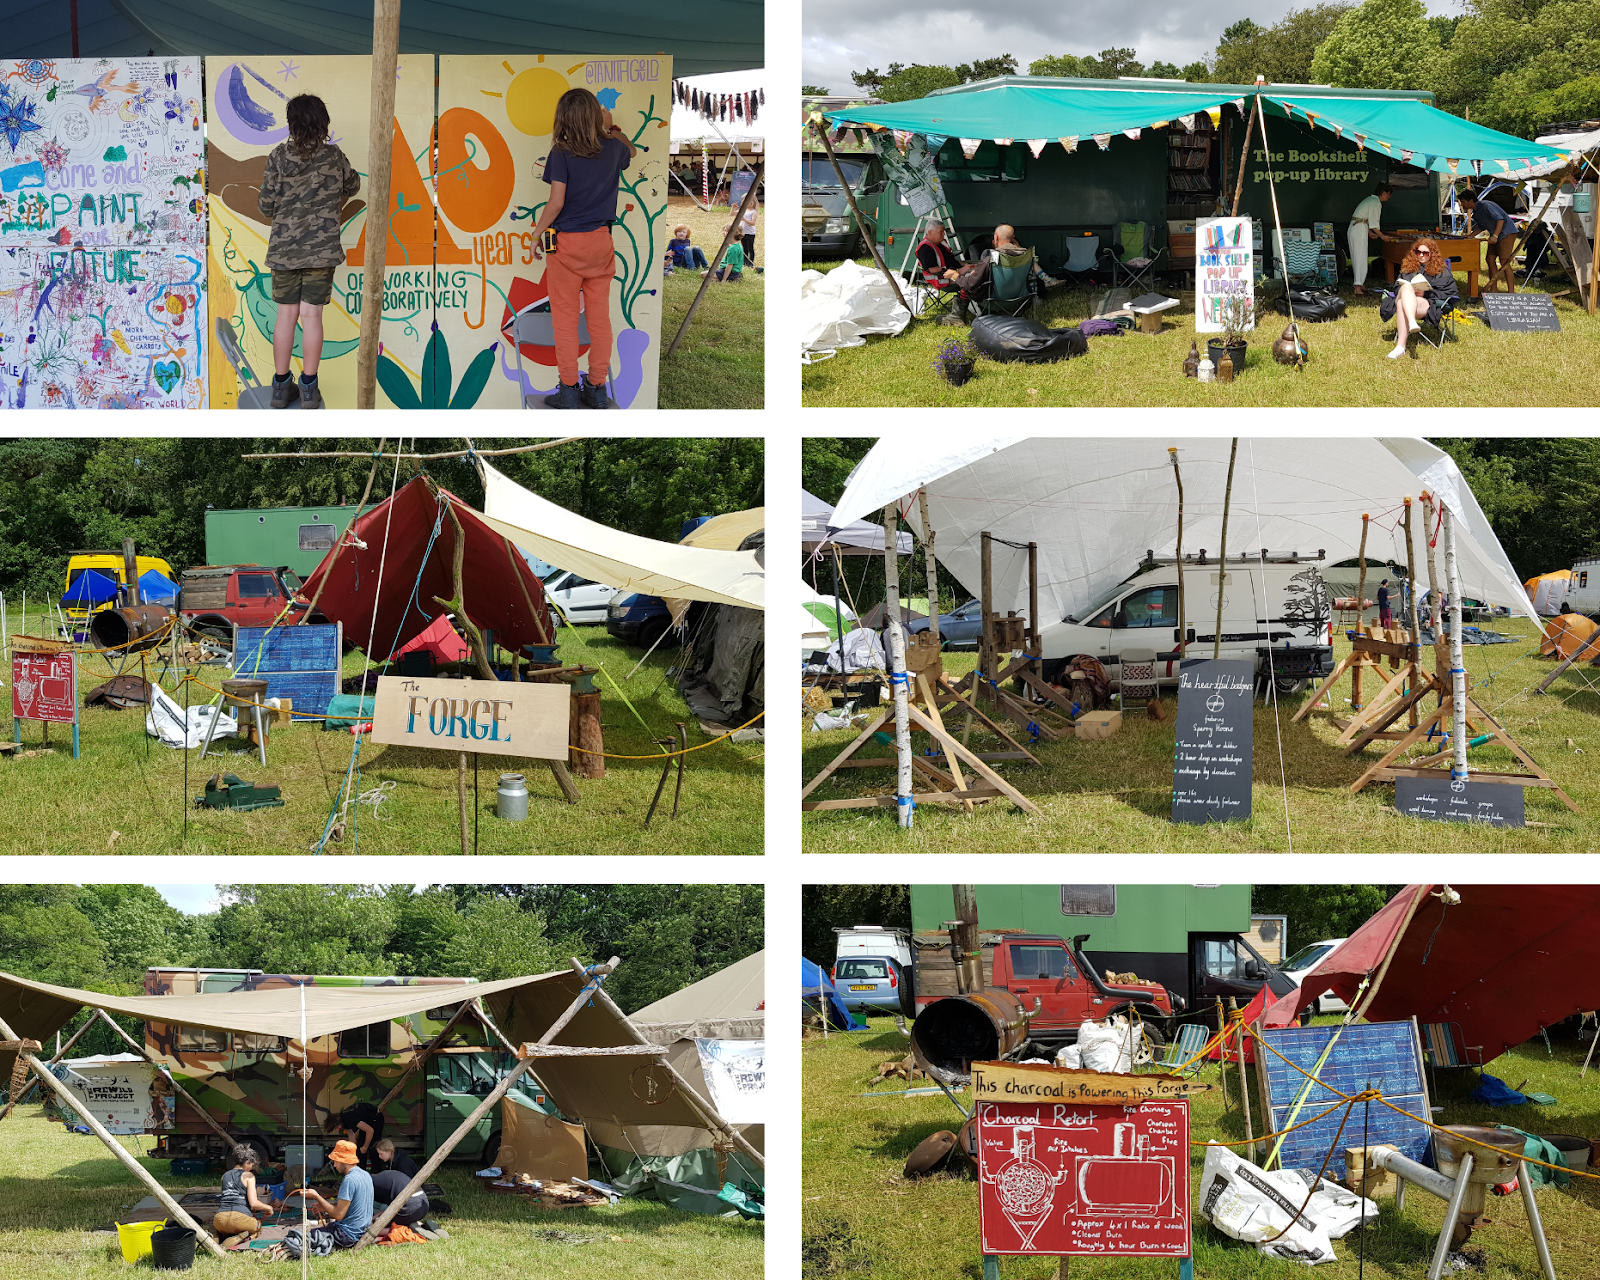 A collage of images of activities the Land Skills Fair. 1. Two children add to a colourful collaborative art wall
2. A mobile home with a large green awning fringed with bunting hosts the Bookshelf pop up library. People relax in deckchairs or browse the books. 
3. The Heartful Bodger, where participants could try their hand at spurtle and dibber turning using human-powered lathes. 
4. Another exhibit - the charcoal powered forge.
5. Participants seated on the ground crafting at the Rewild Project tent
6. The Forge.